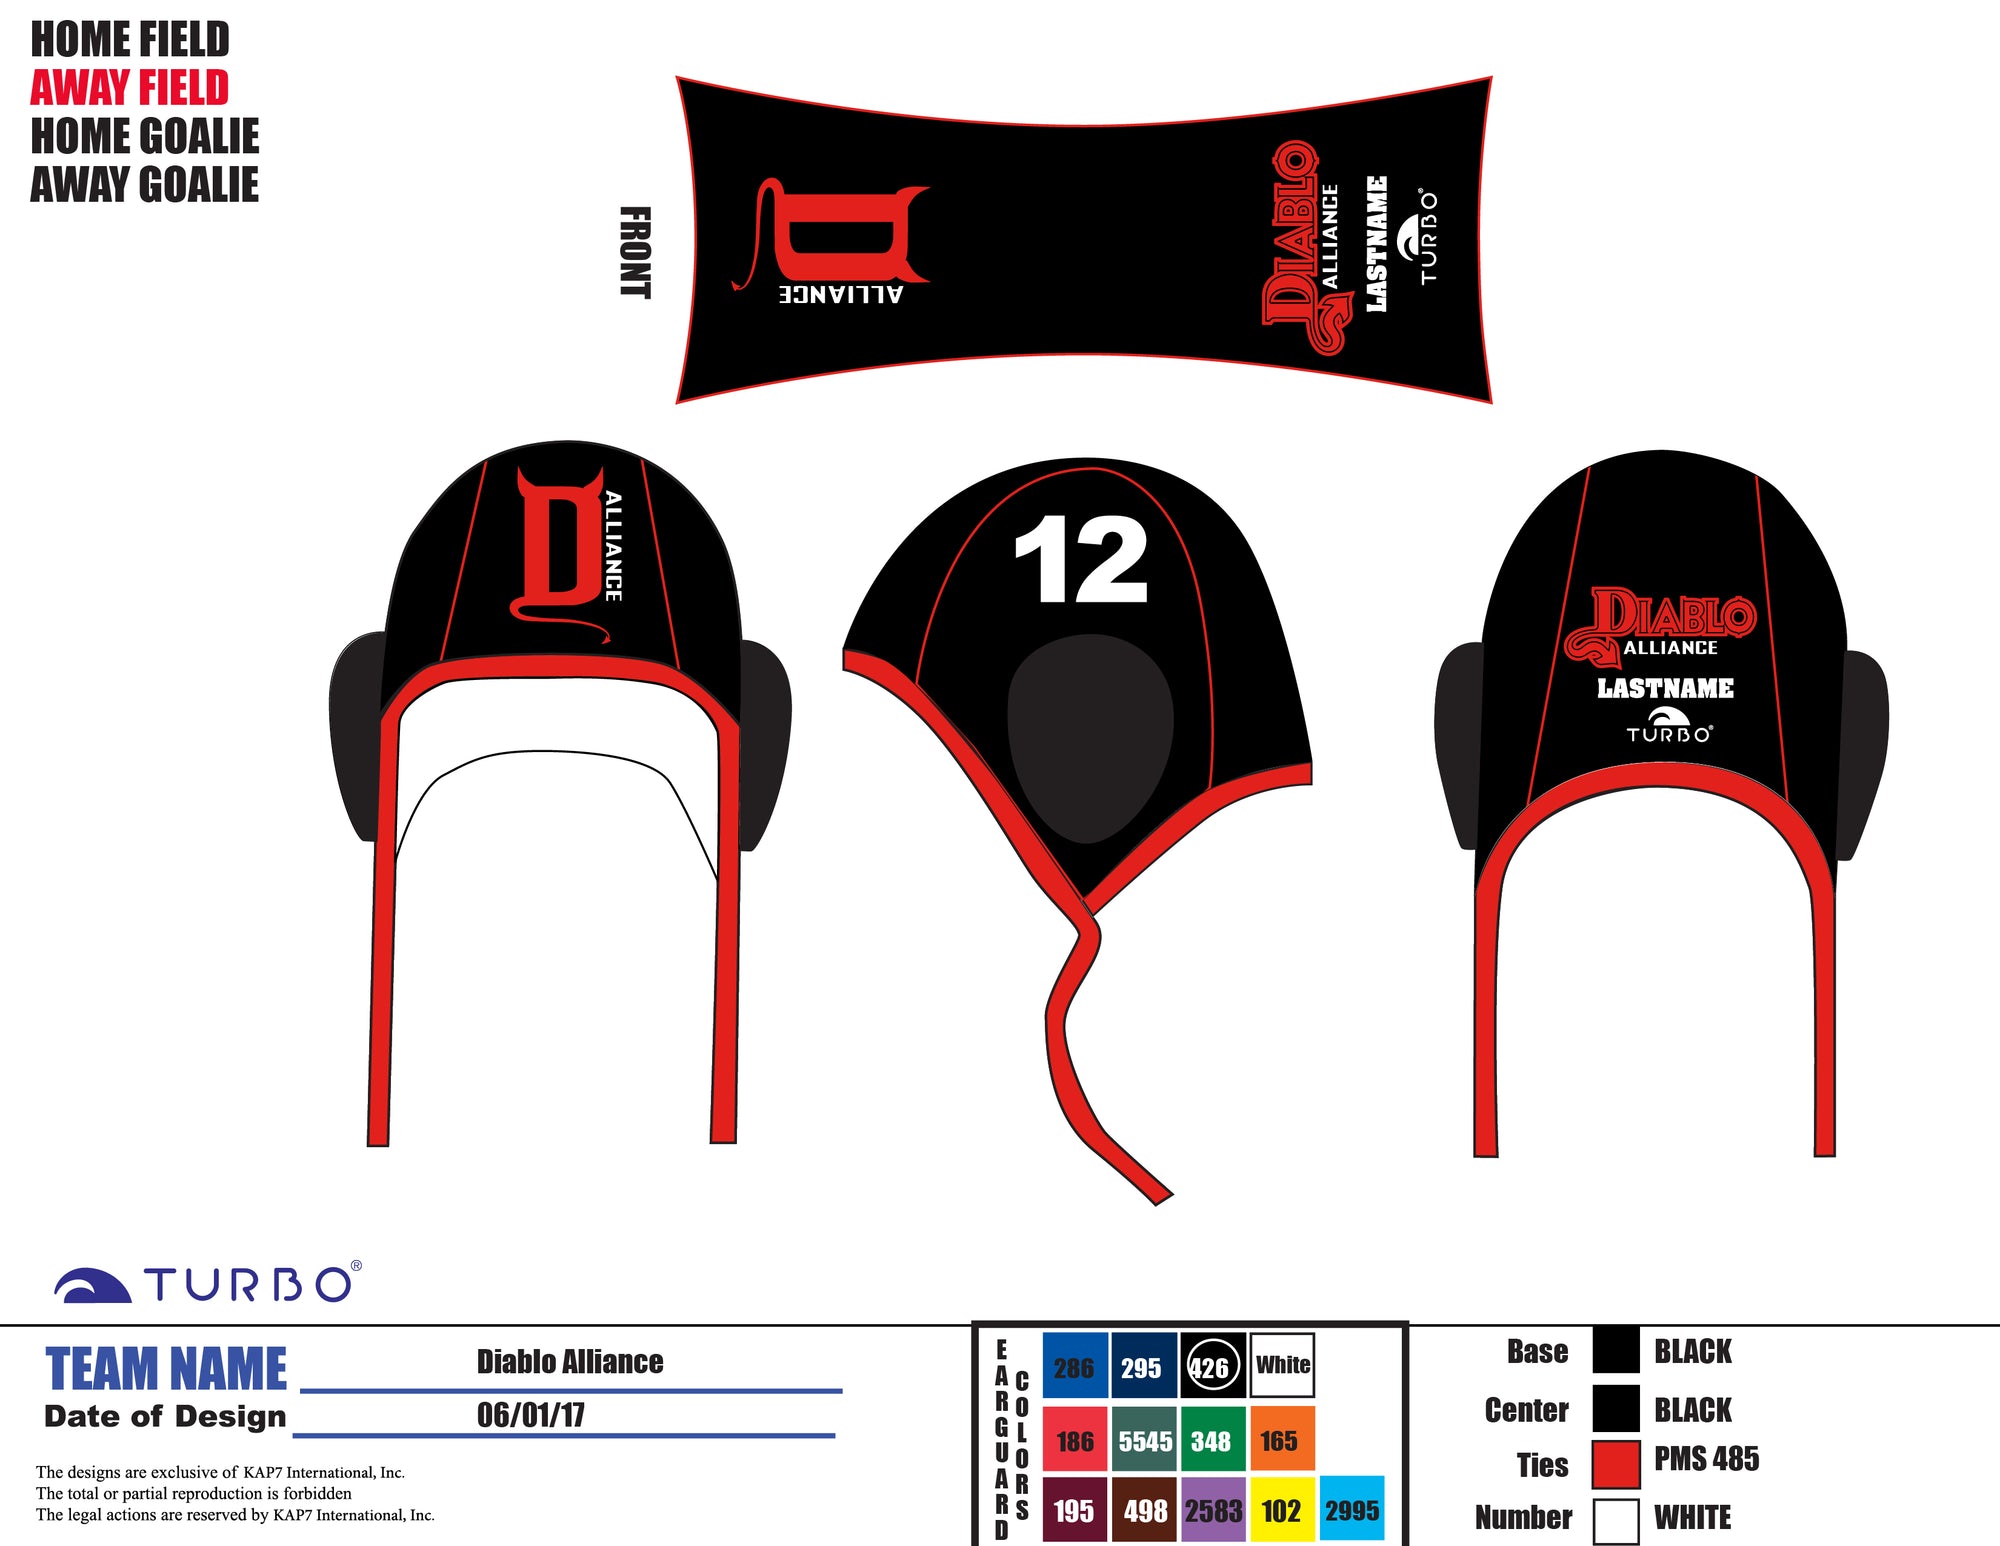 Diablo Alliance WPC Team Store - TURBO Field Athlete Water Polo Caps -  - include last name and NUMBER